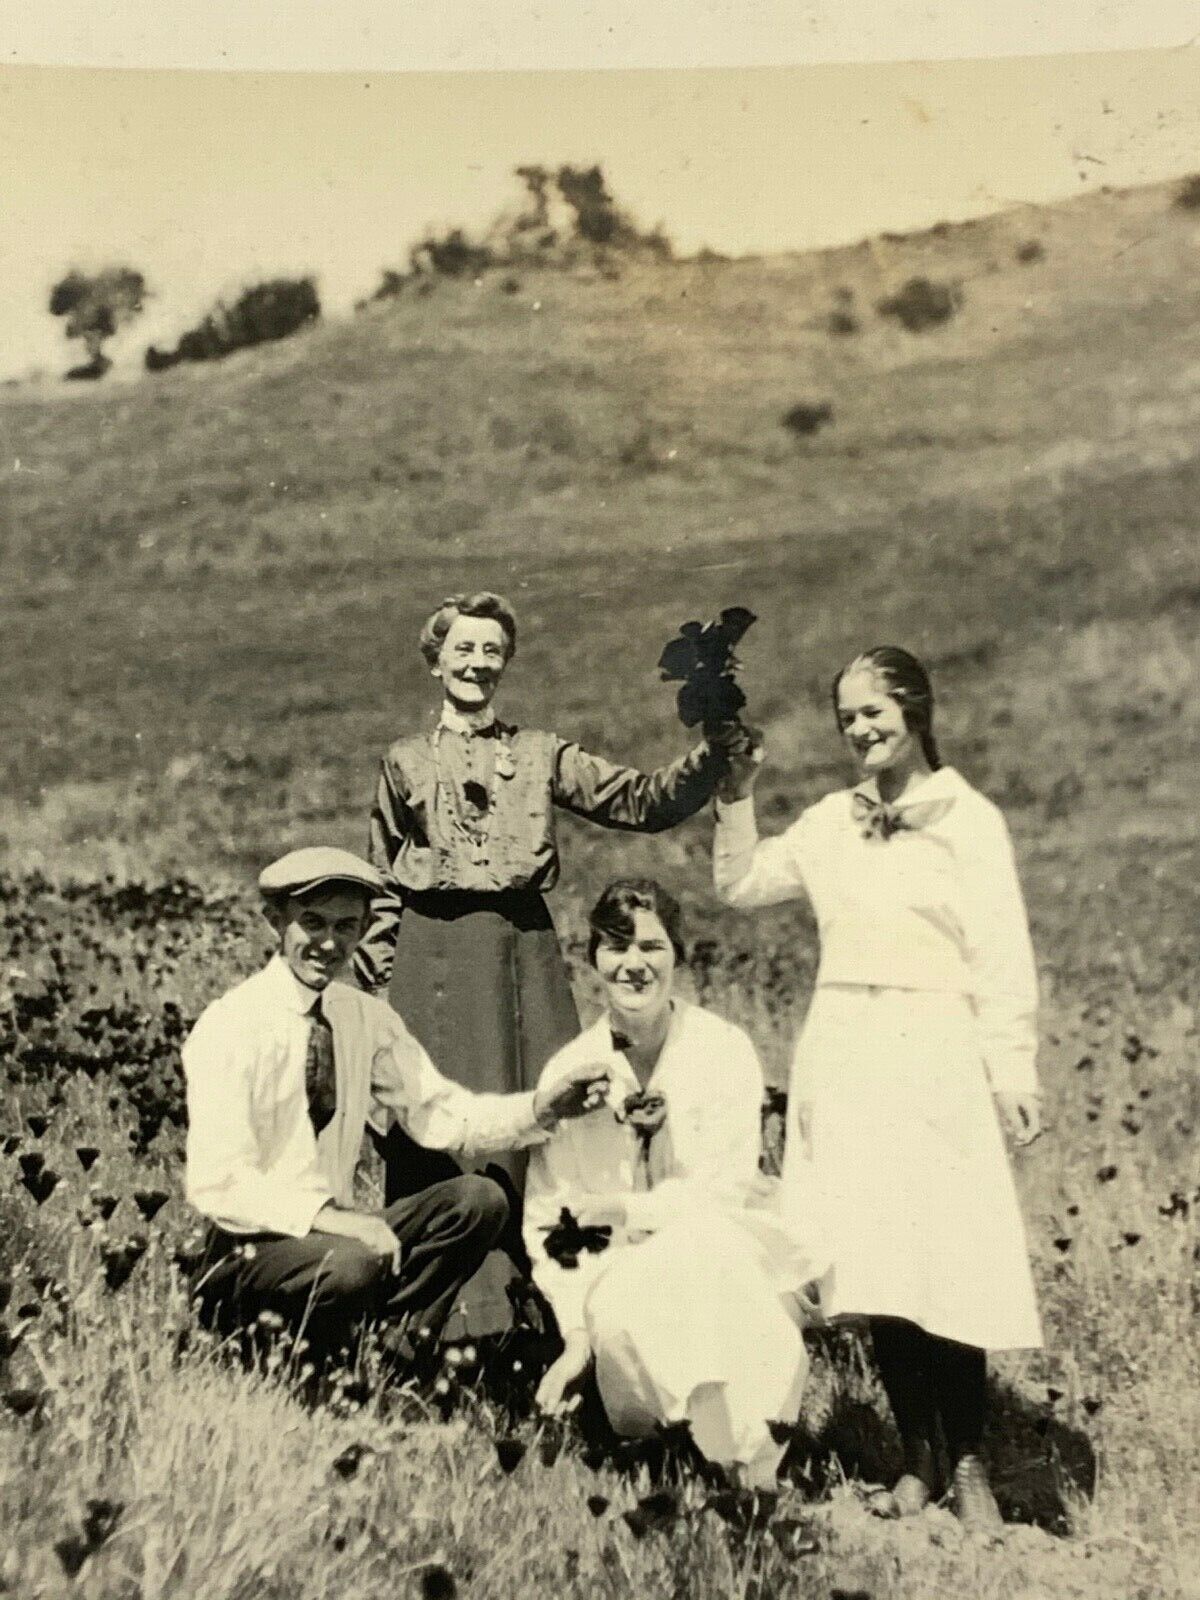 (AmF) Early FOUND Photo Photograph Family In Hills Picking Flowers Artistic 